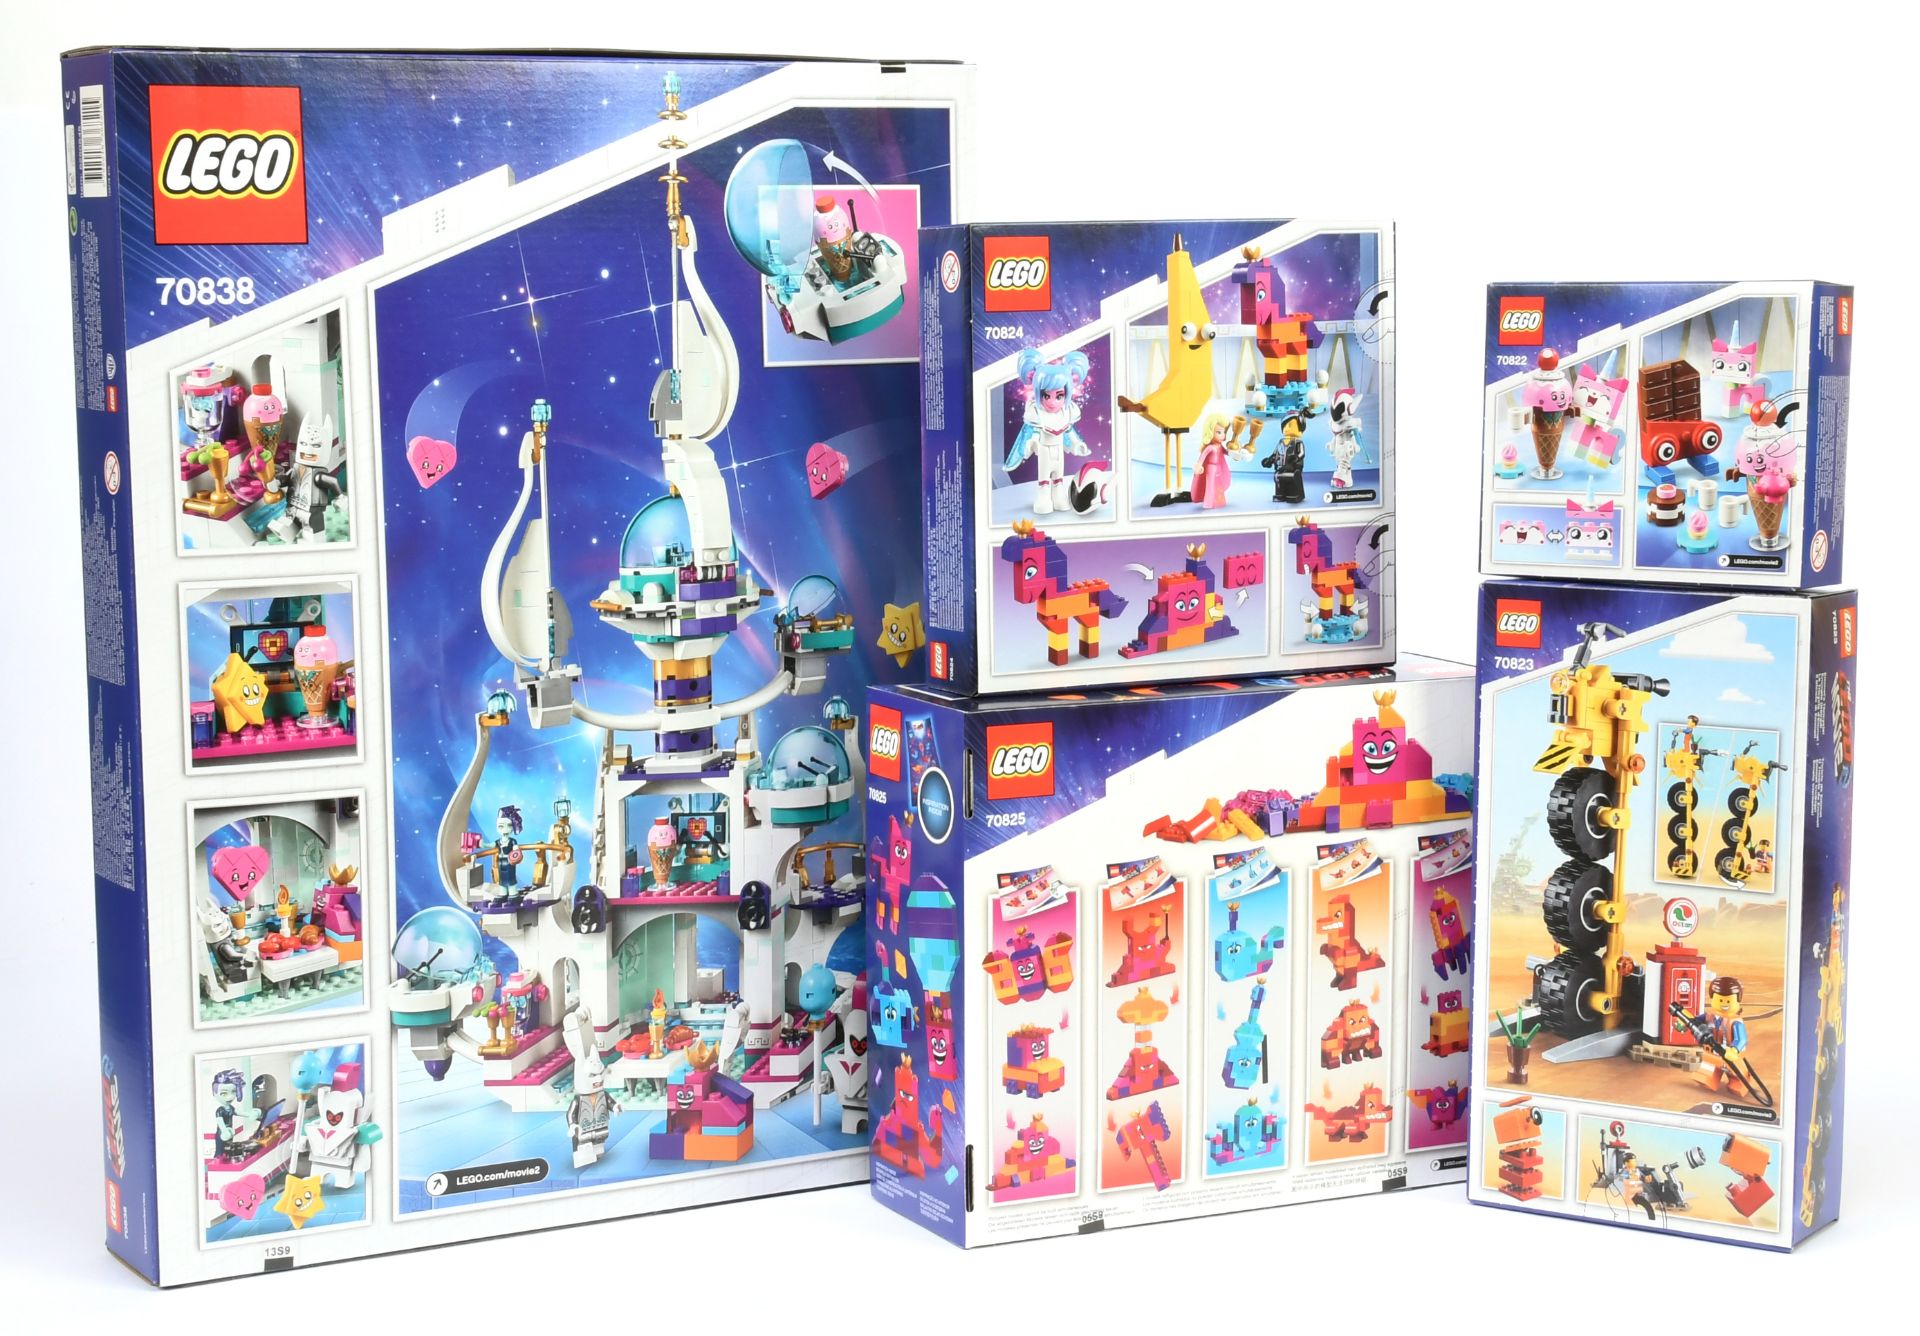 Lego the Movie sets x 5 includes 70838 Queen Watevra's 'So-Not-Evil' Space Palace, 70822 Unikitty... - Image 2 of 2